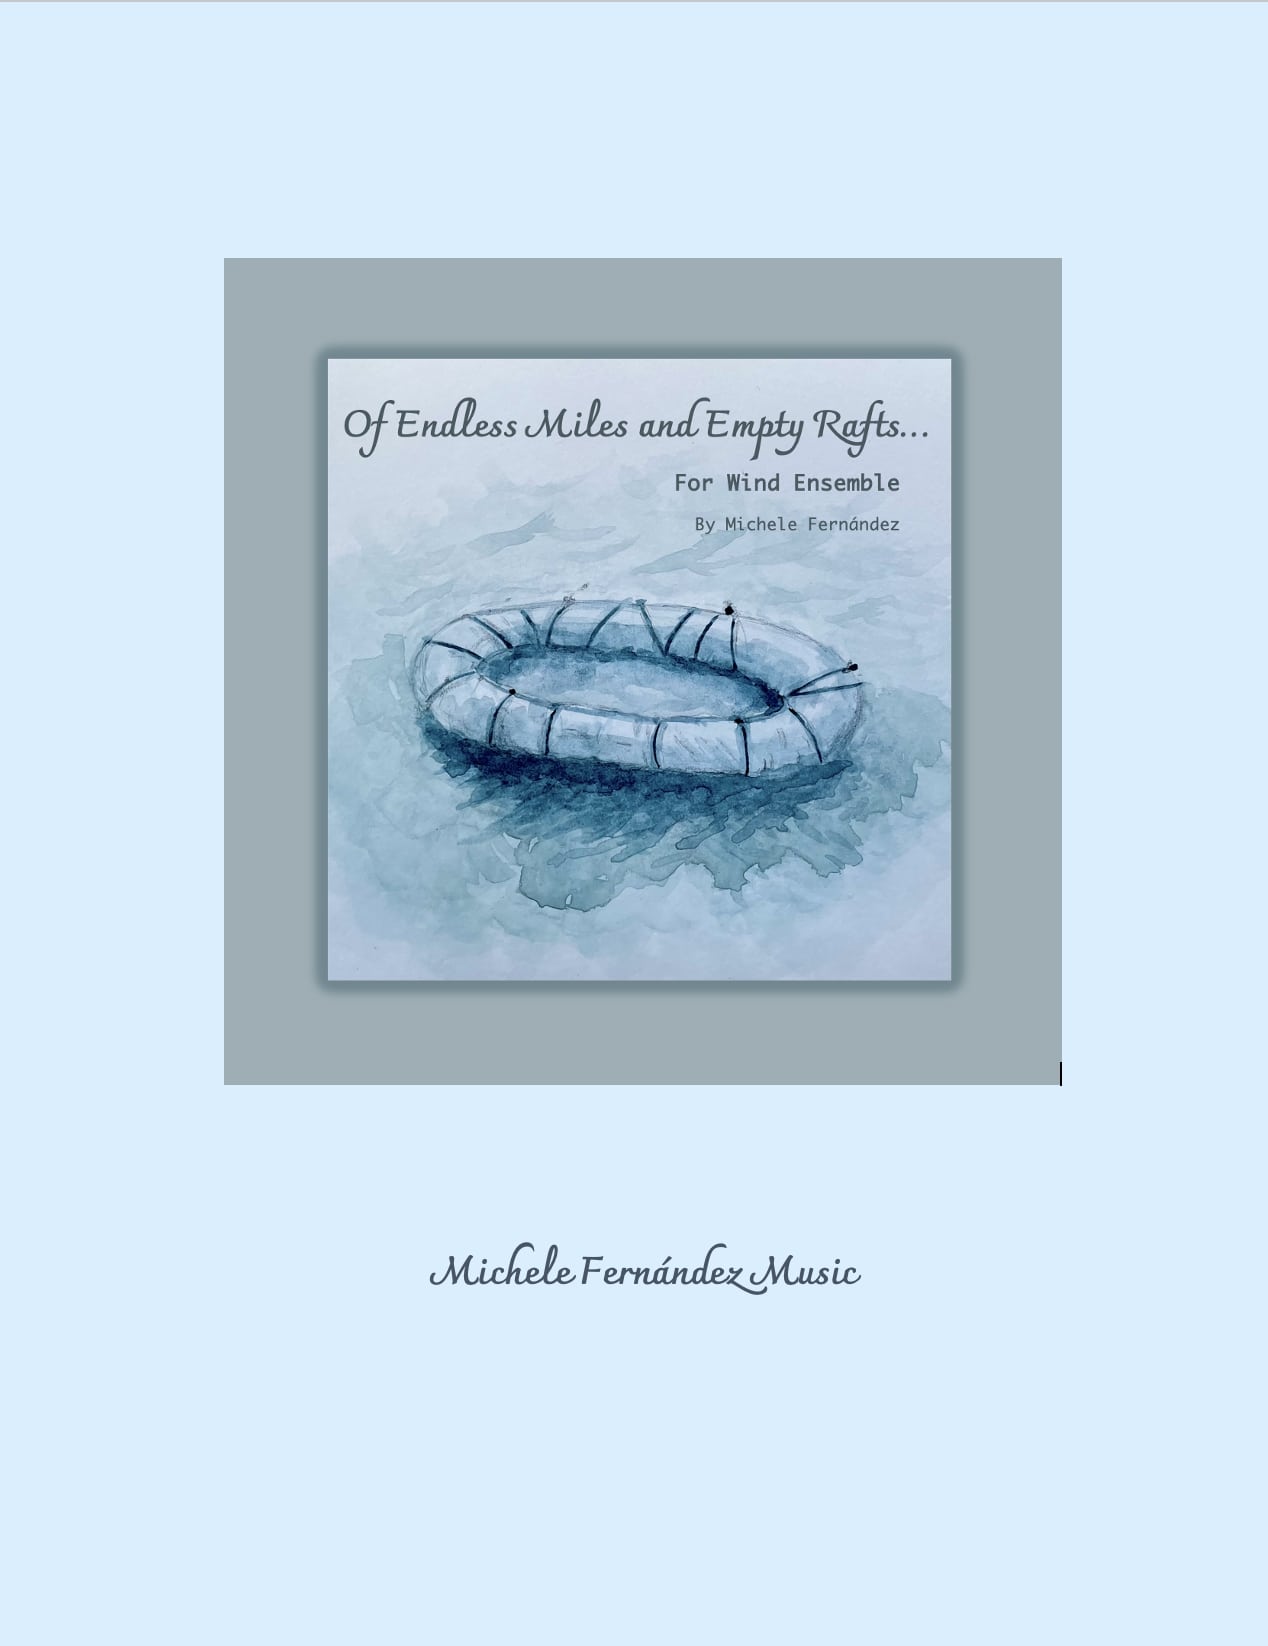 Of Endless Miles and Empty Rafts band sheet music cover